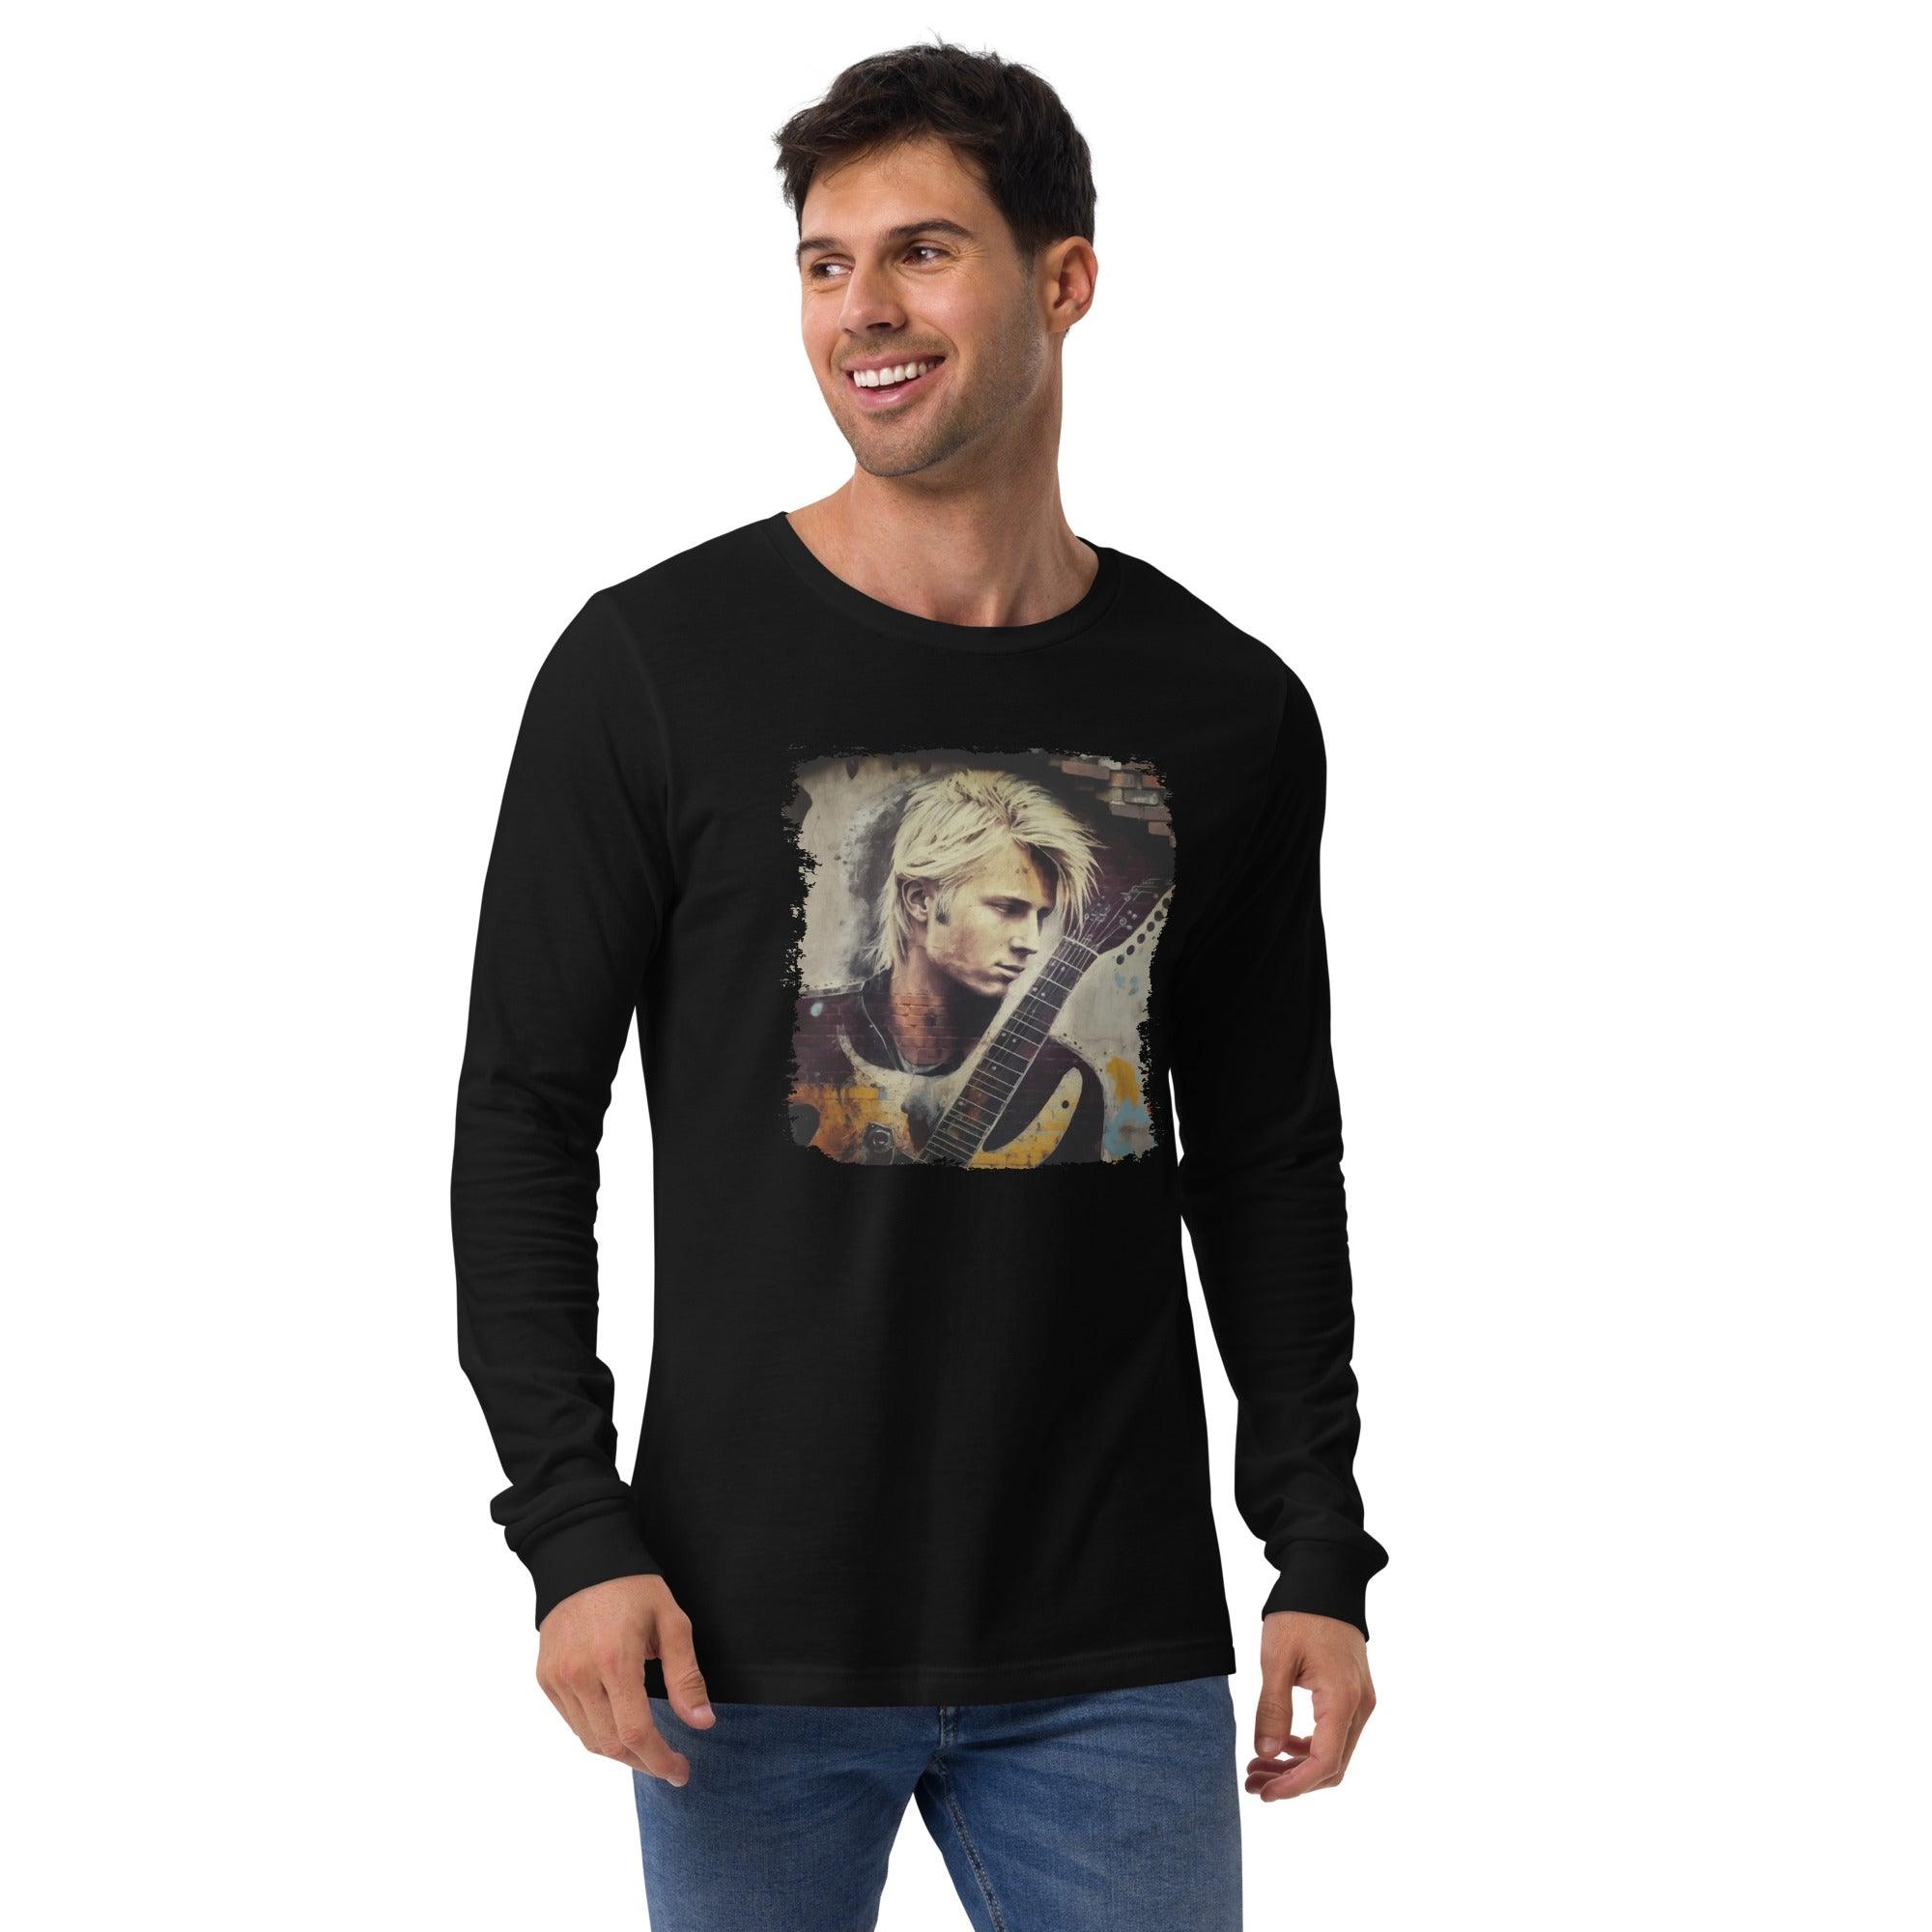 Performing With Explosive Energy Unisex Long Sleeve Tee - Beyond T-shirts